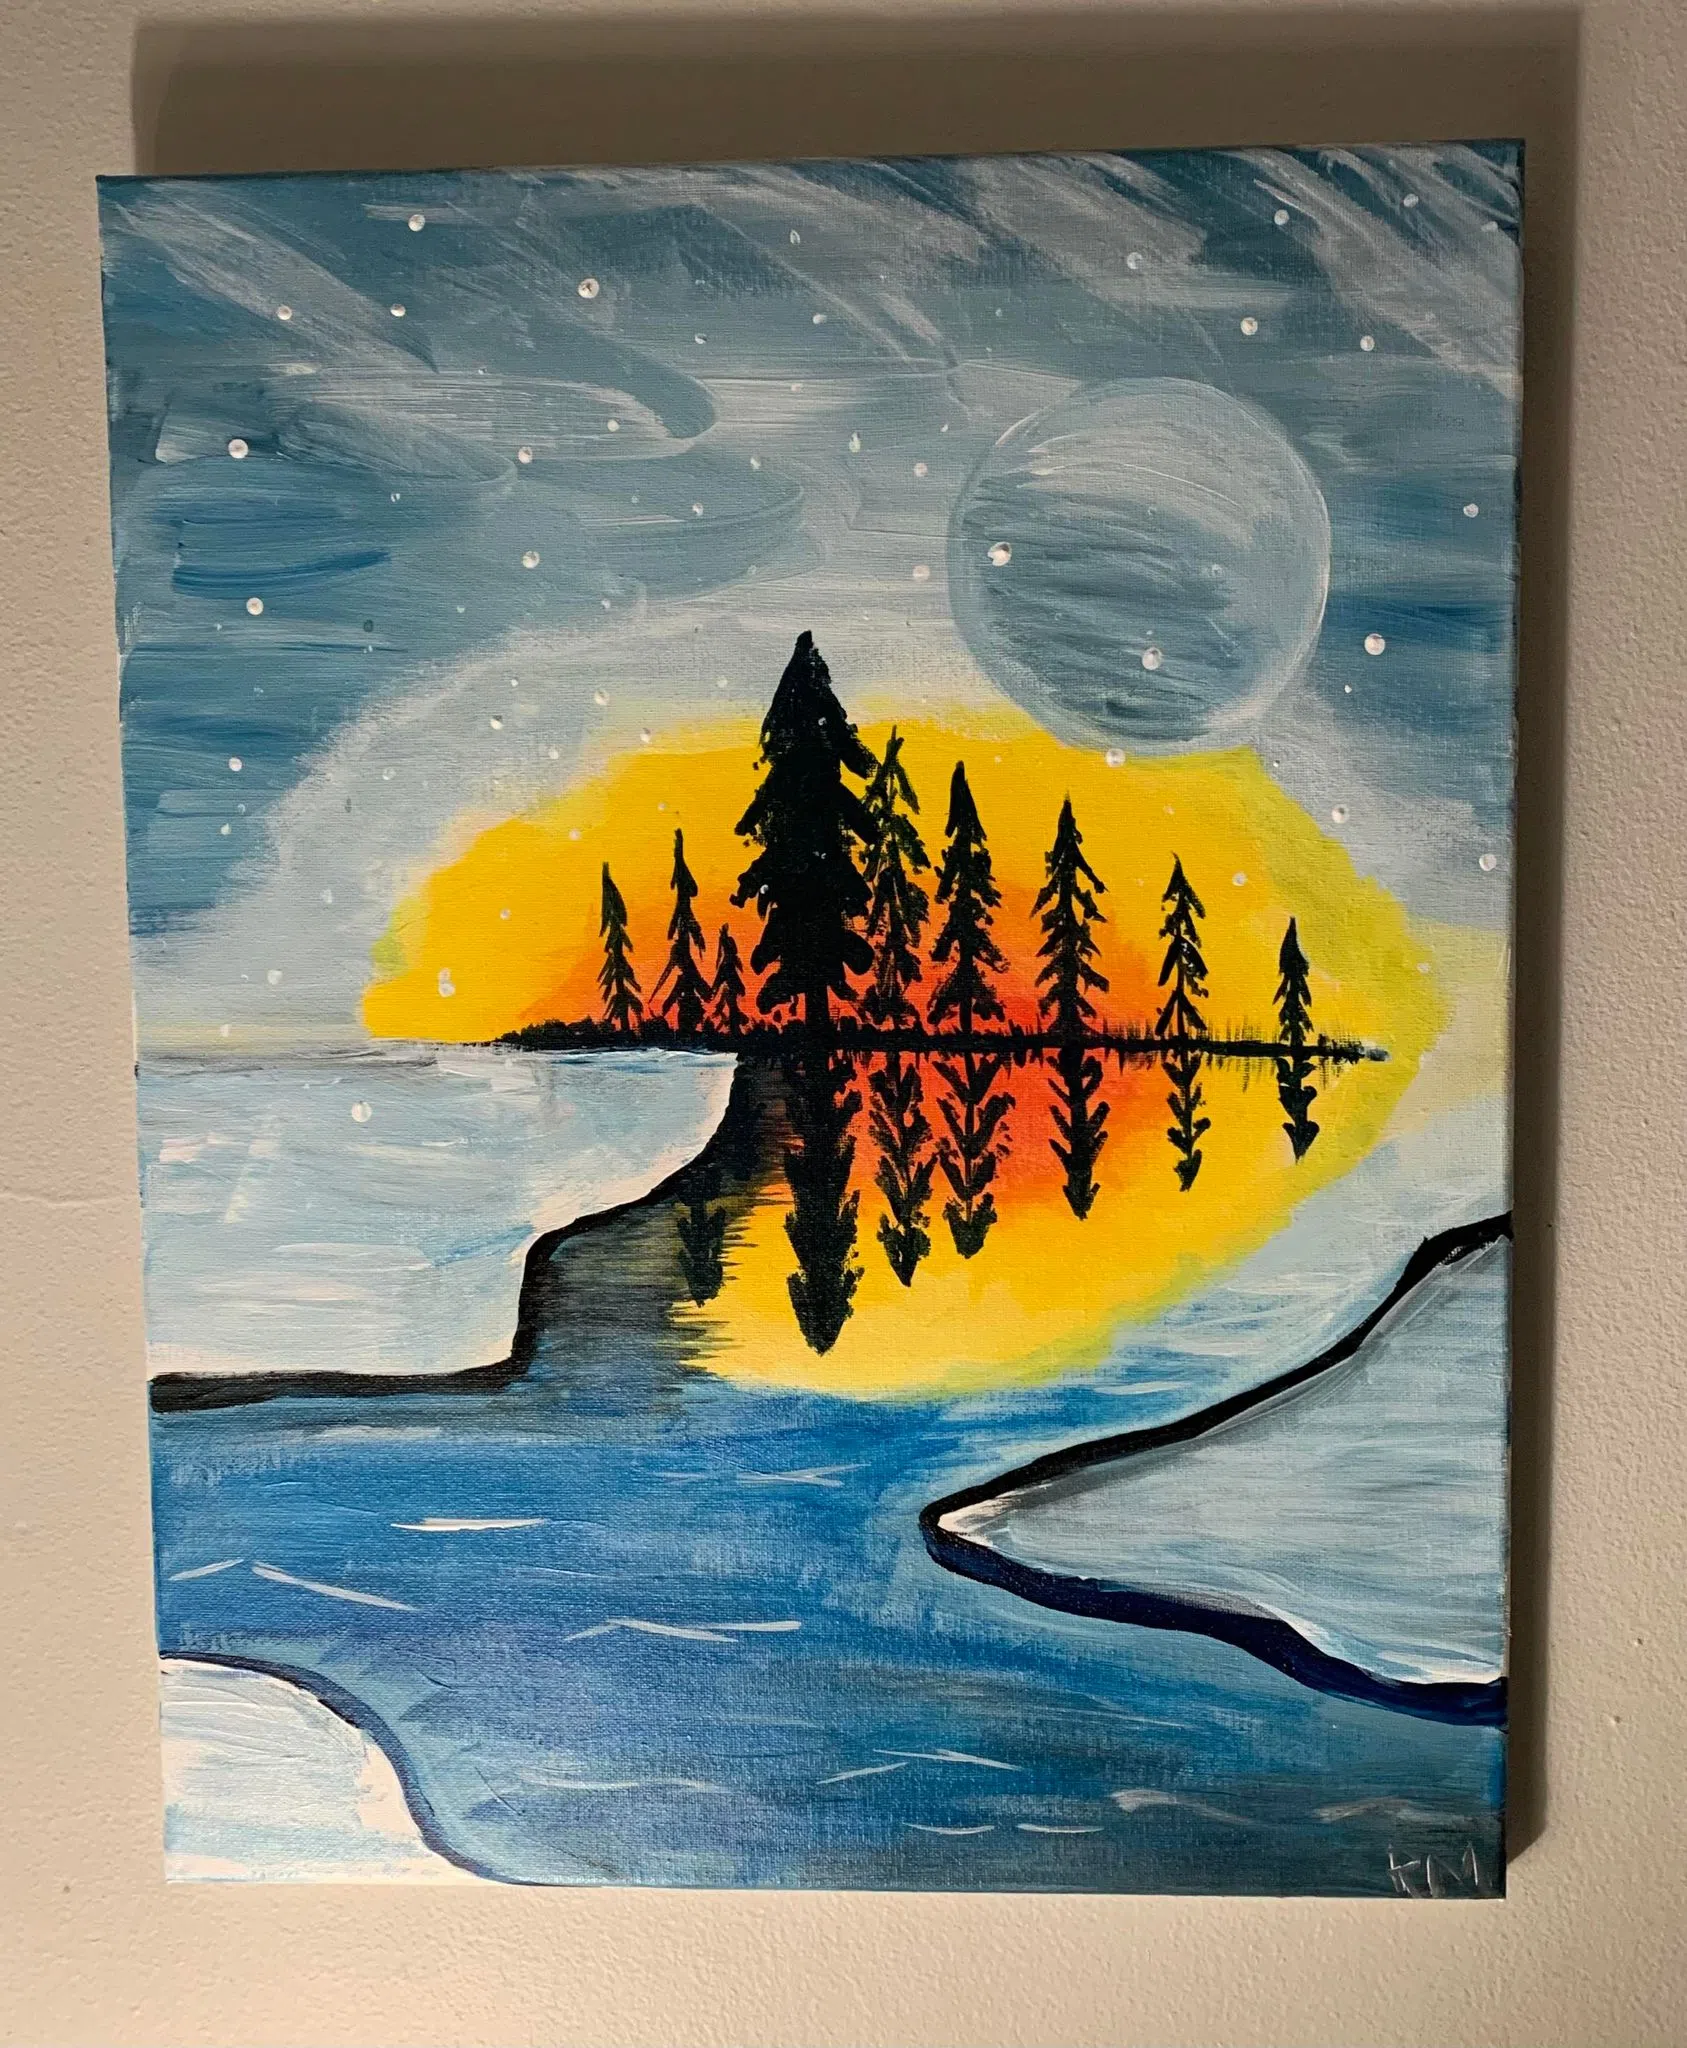 Russell Is No Bob Ross But He Had FUN!